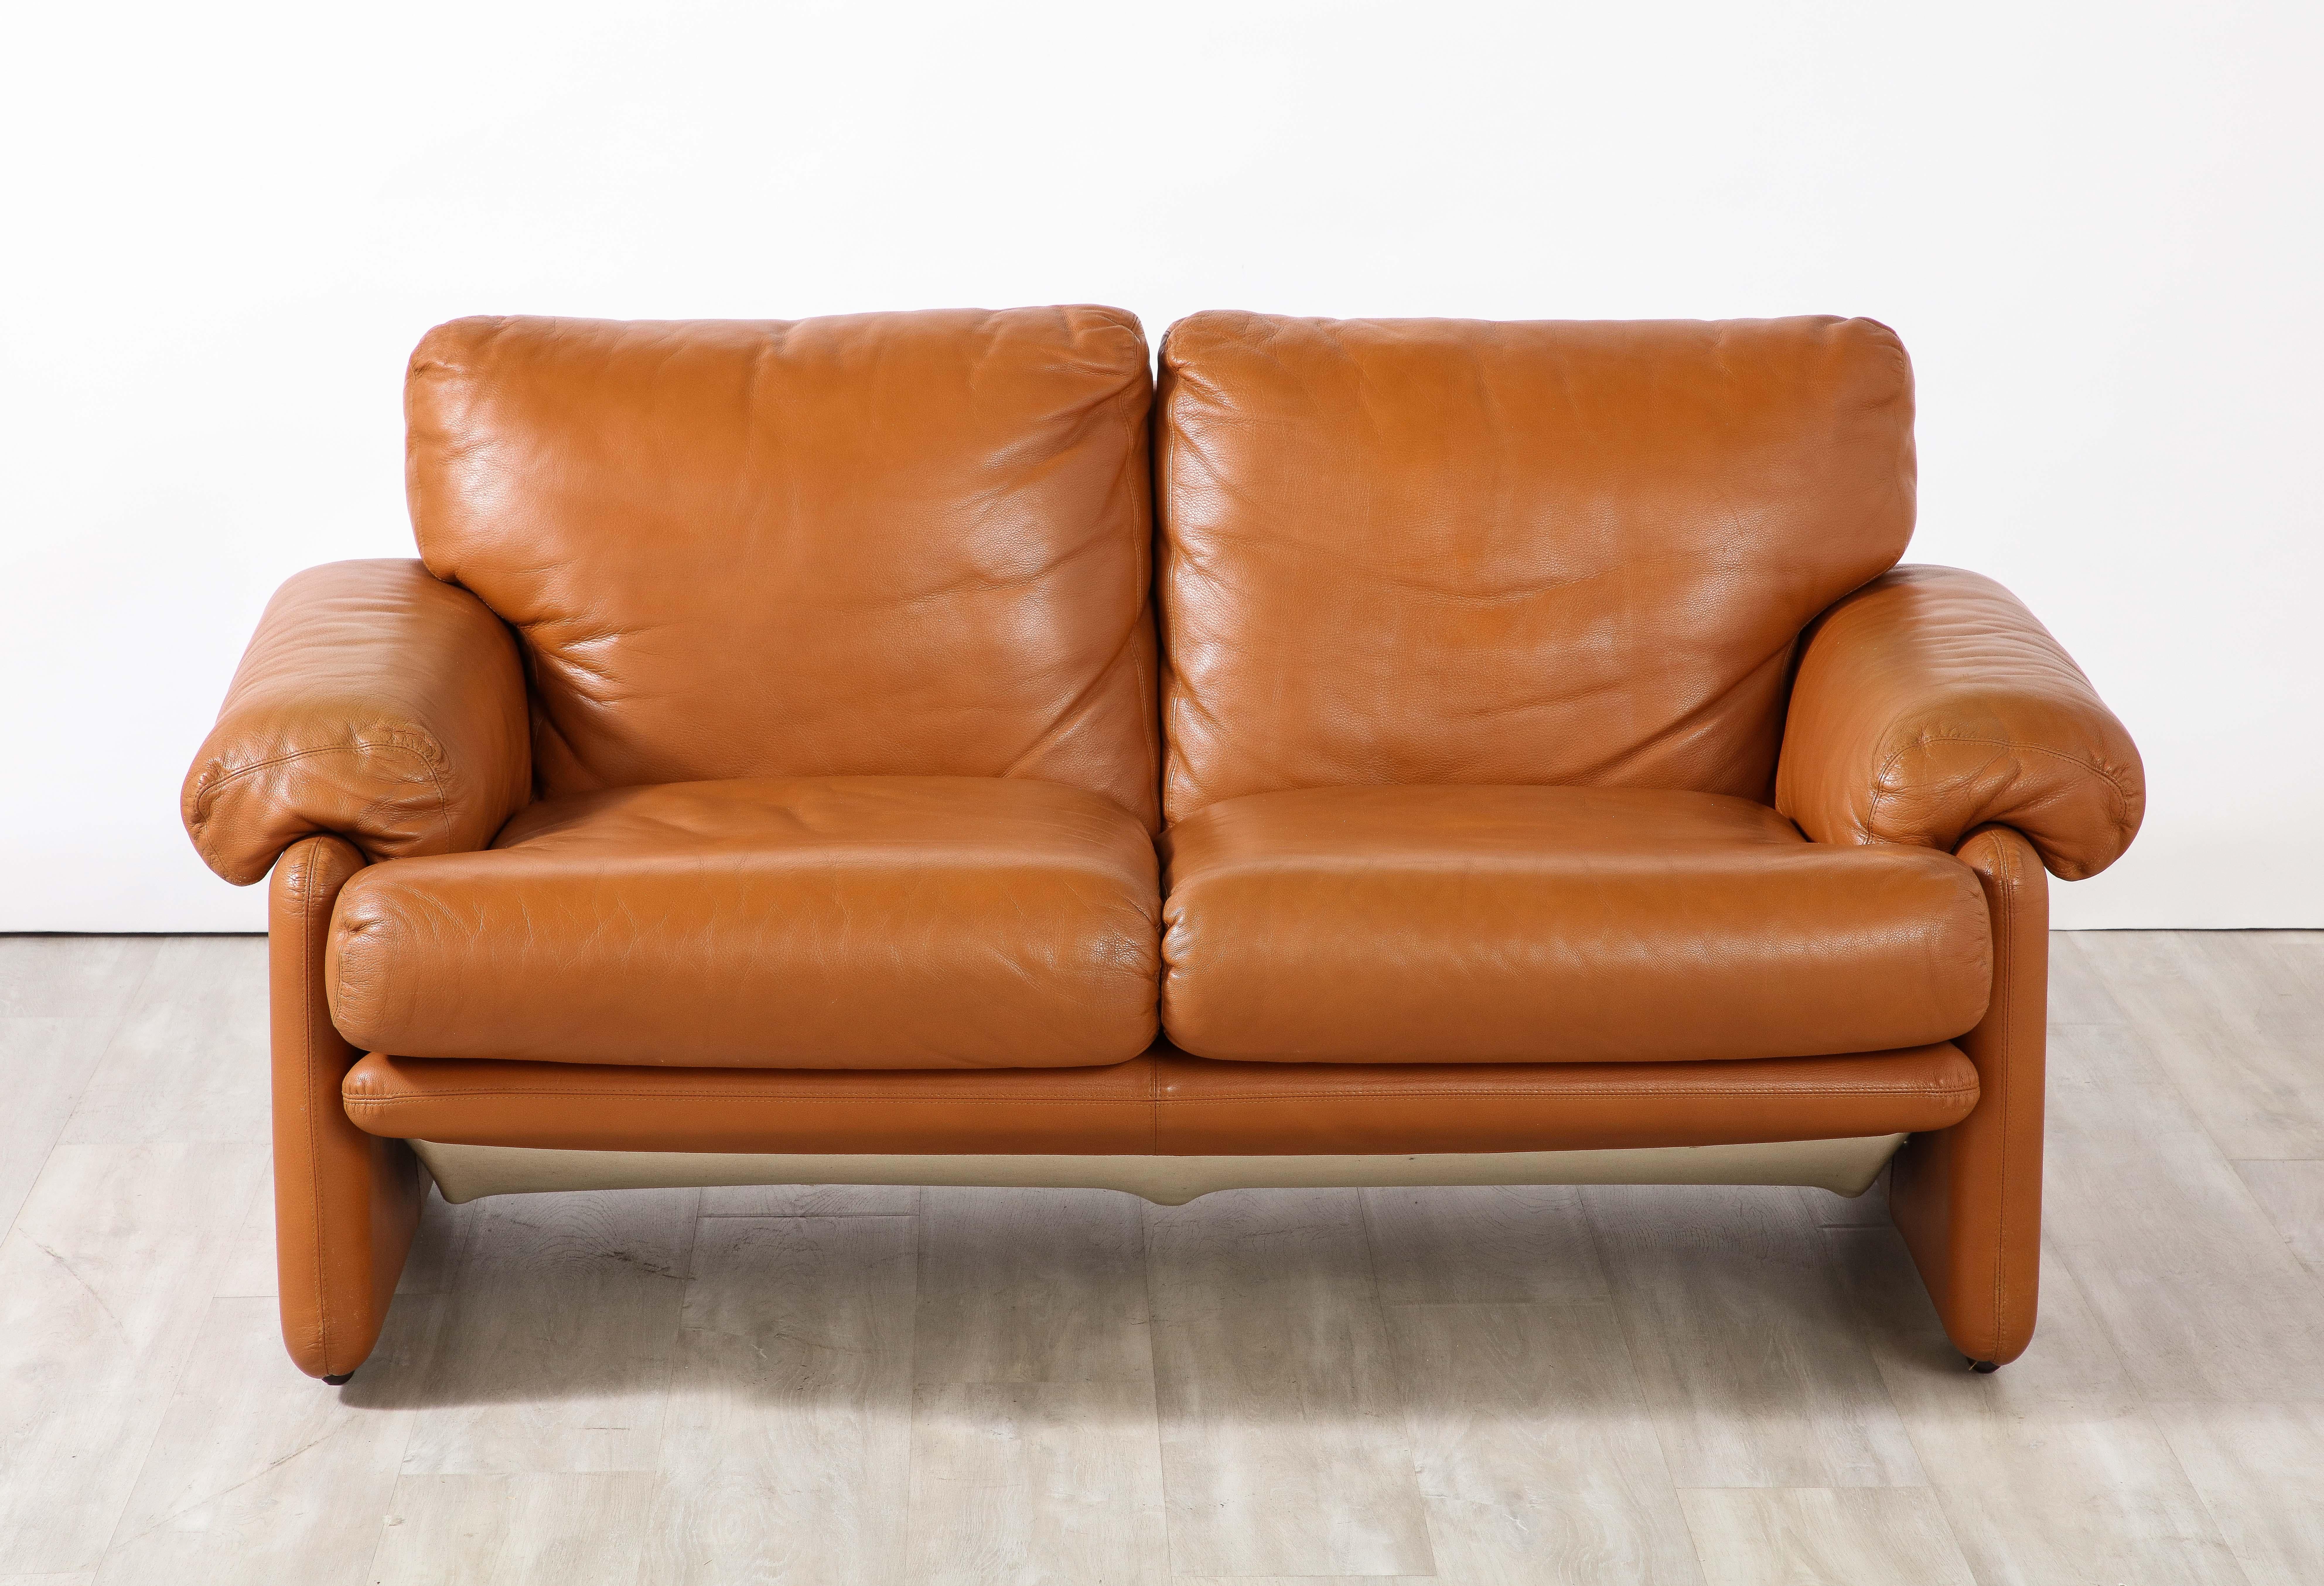 A pair of 'Coronado' two seat sofas in beautiful cognac leather, designed by Tobia Scarpa and manufactured by the Italian firm, B&B Italia, circa 1975. 

The seating are made with a then revolutionary kind of molded polyurethane foam for excellent